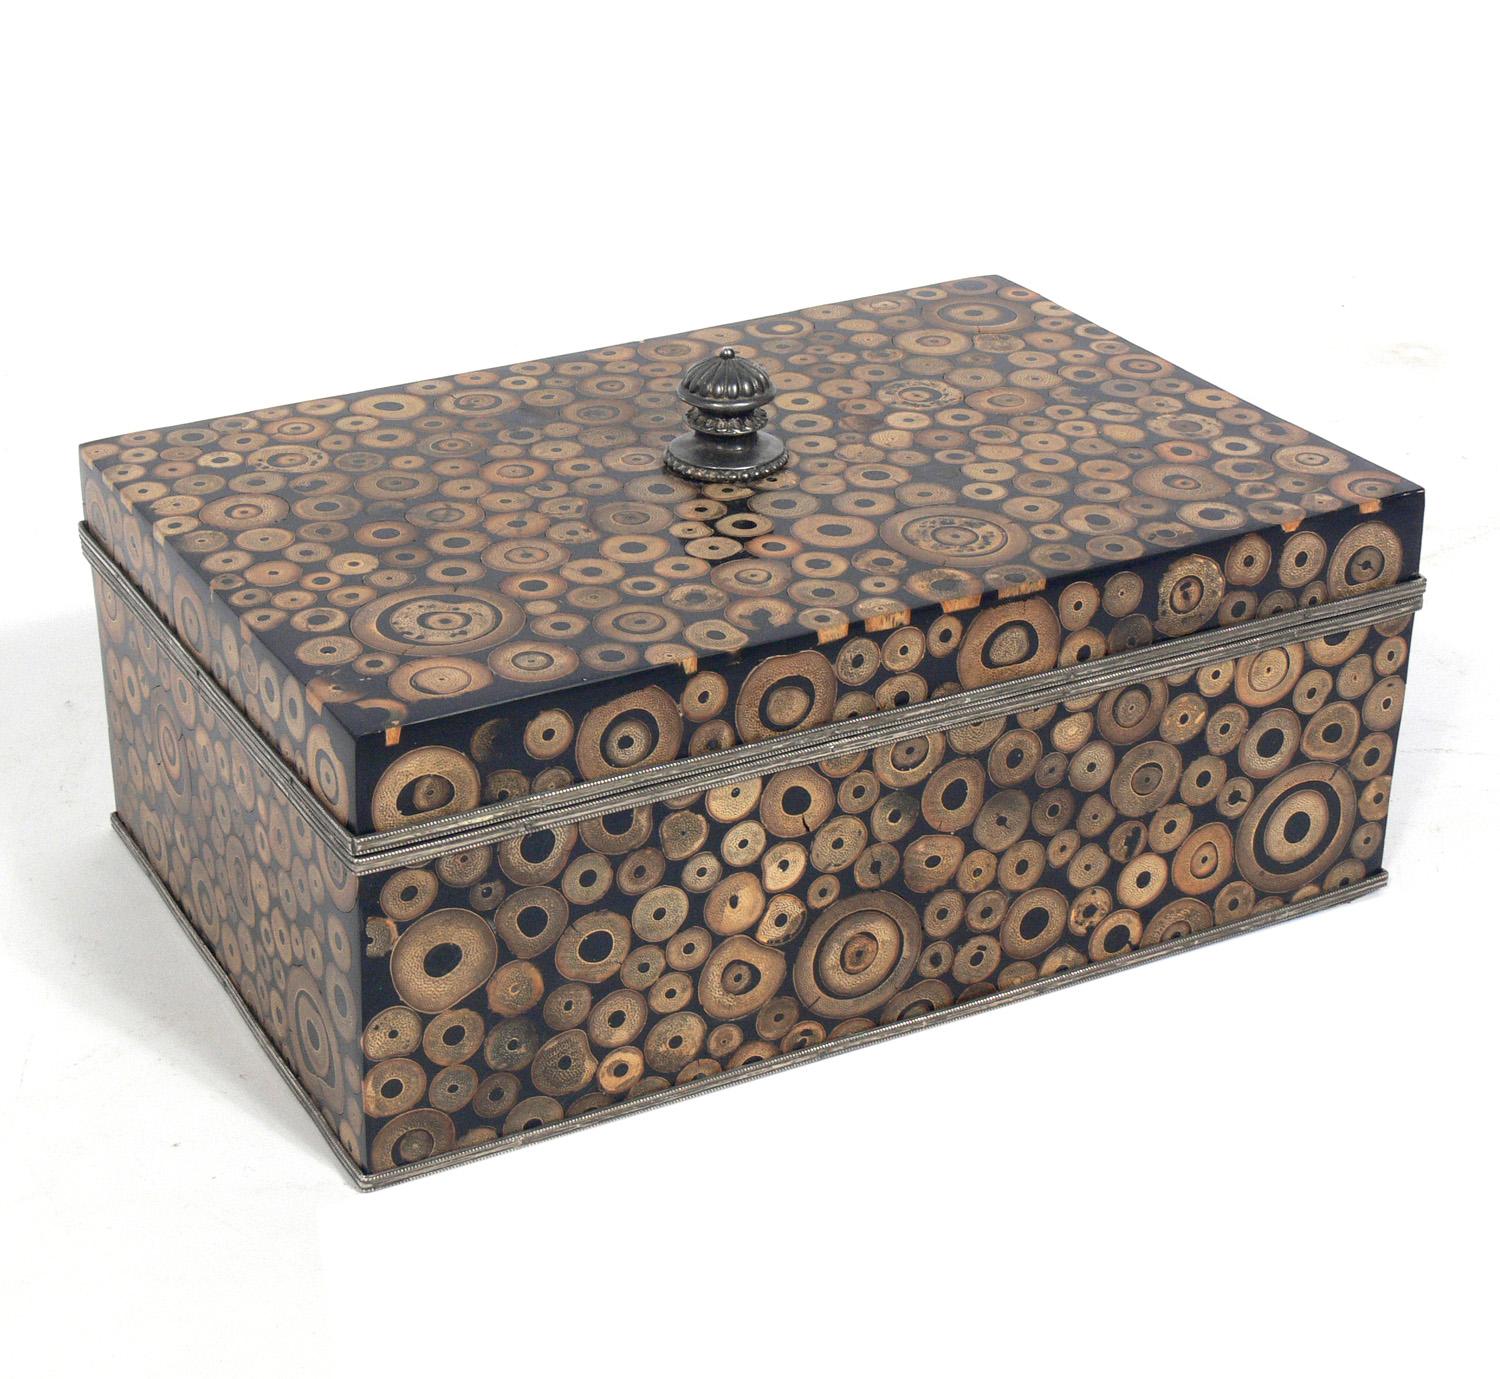 American Craftsman Selection of Modernist Boxes